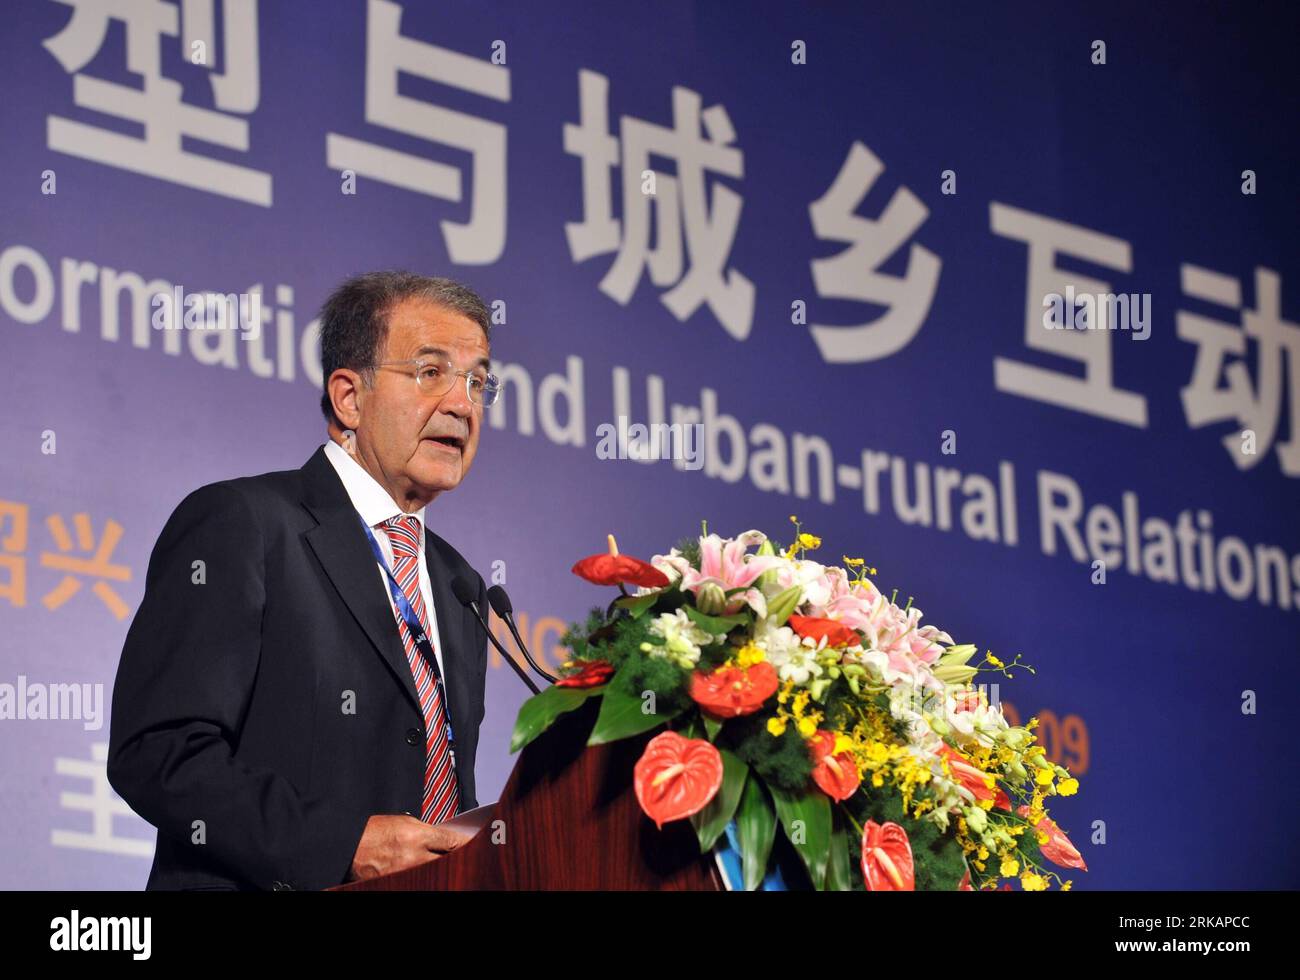 Bildnummer: 54414613  Datum: 09.09.2010  Copyright: imago/Xinhua (100909) -- SHAOXING, Sep. 09, 2010 (Xinhua) -- Romano Prodi, former President of European Commission and former Prime Minister of Italy, delivers a speech at the fifth theme forum of the Shanghai World Expo held in Shaoxing, a city of east China s Zhejiang Province, Sep. 9, 2010. The forum, focusing on economic transformation and urban-rural relations, kicked off on Thursday with participation of over 600 guests including renowned scholars and entrepreneurs. (Xinhua/Wang Dingchang) (zn) CHINA-ZHEJIANG-SHAOXING-WORLD EXPO-THEME F Stock Photo